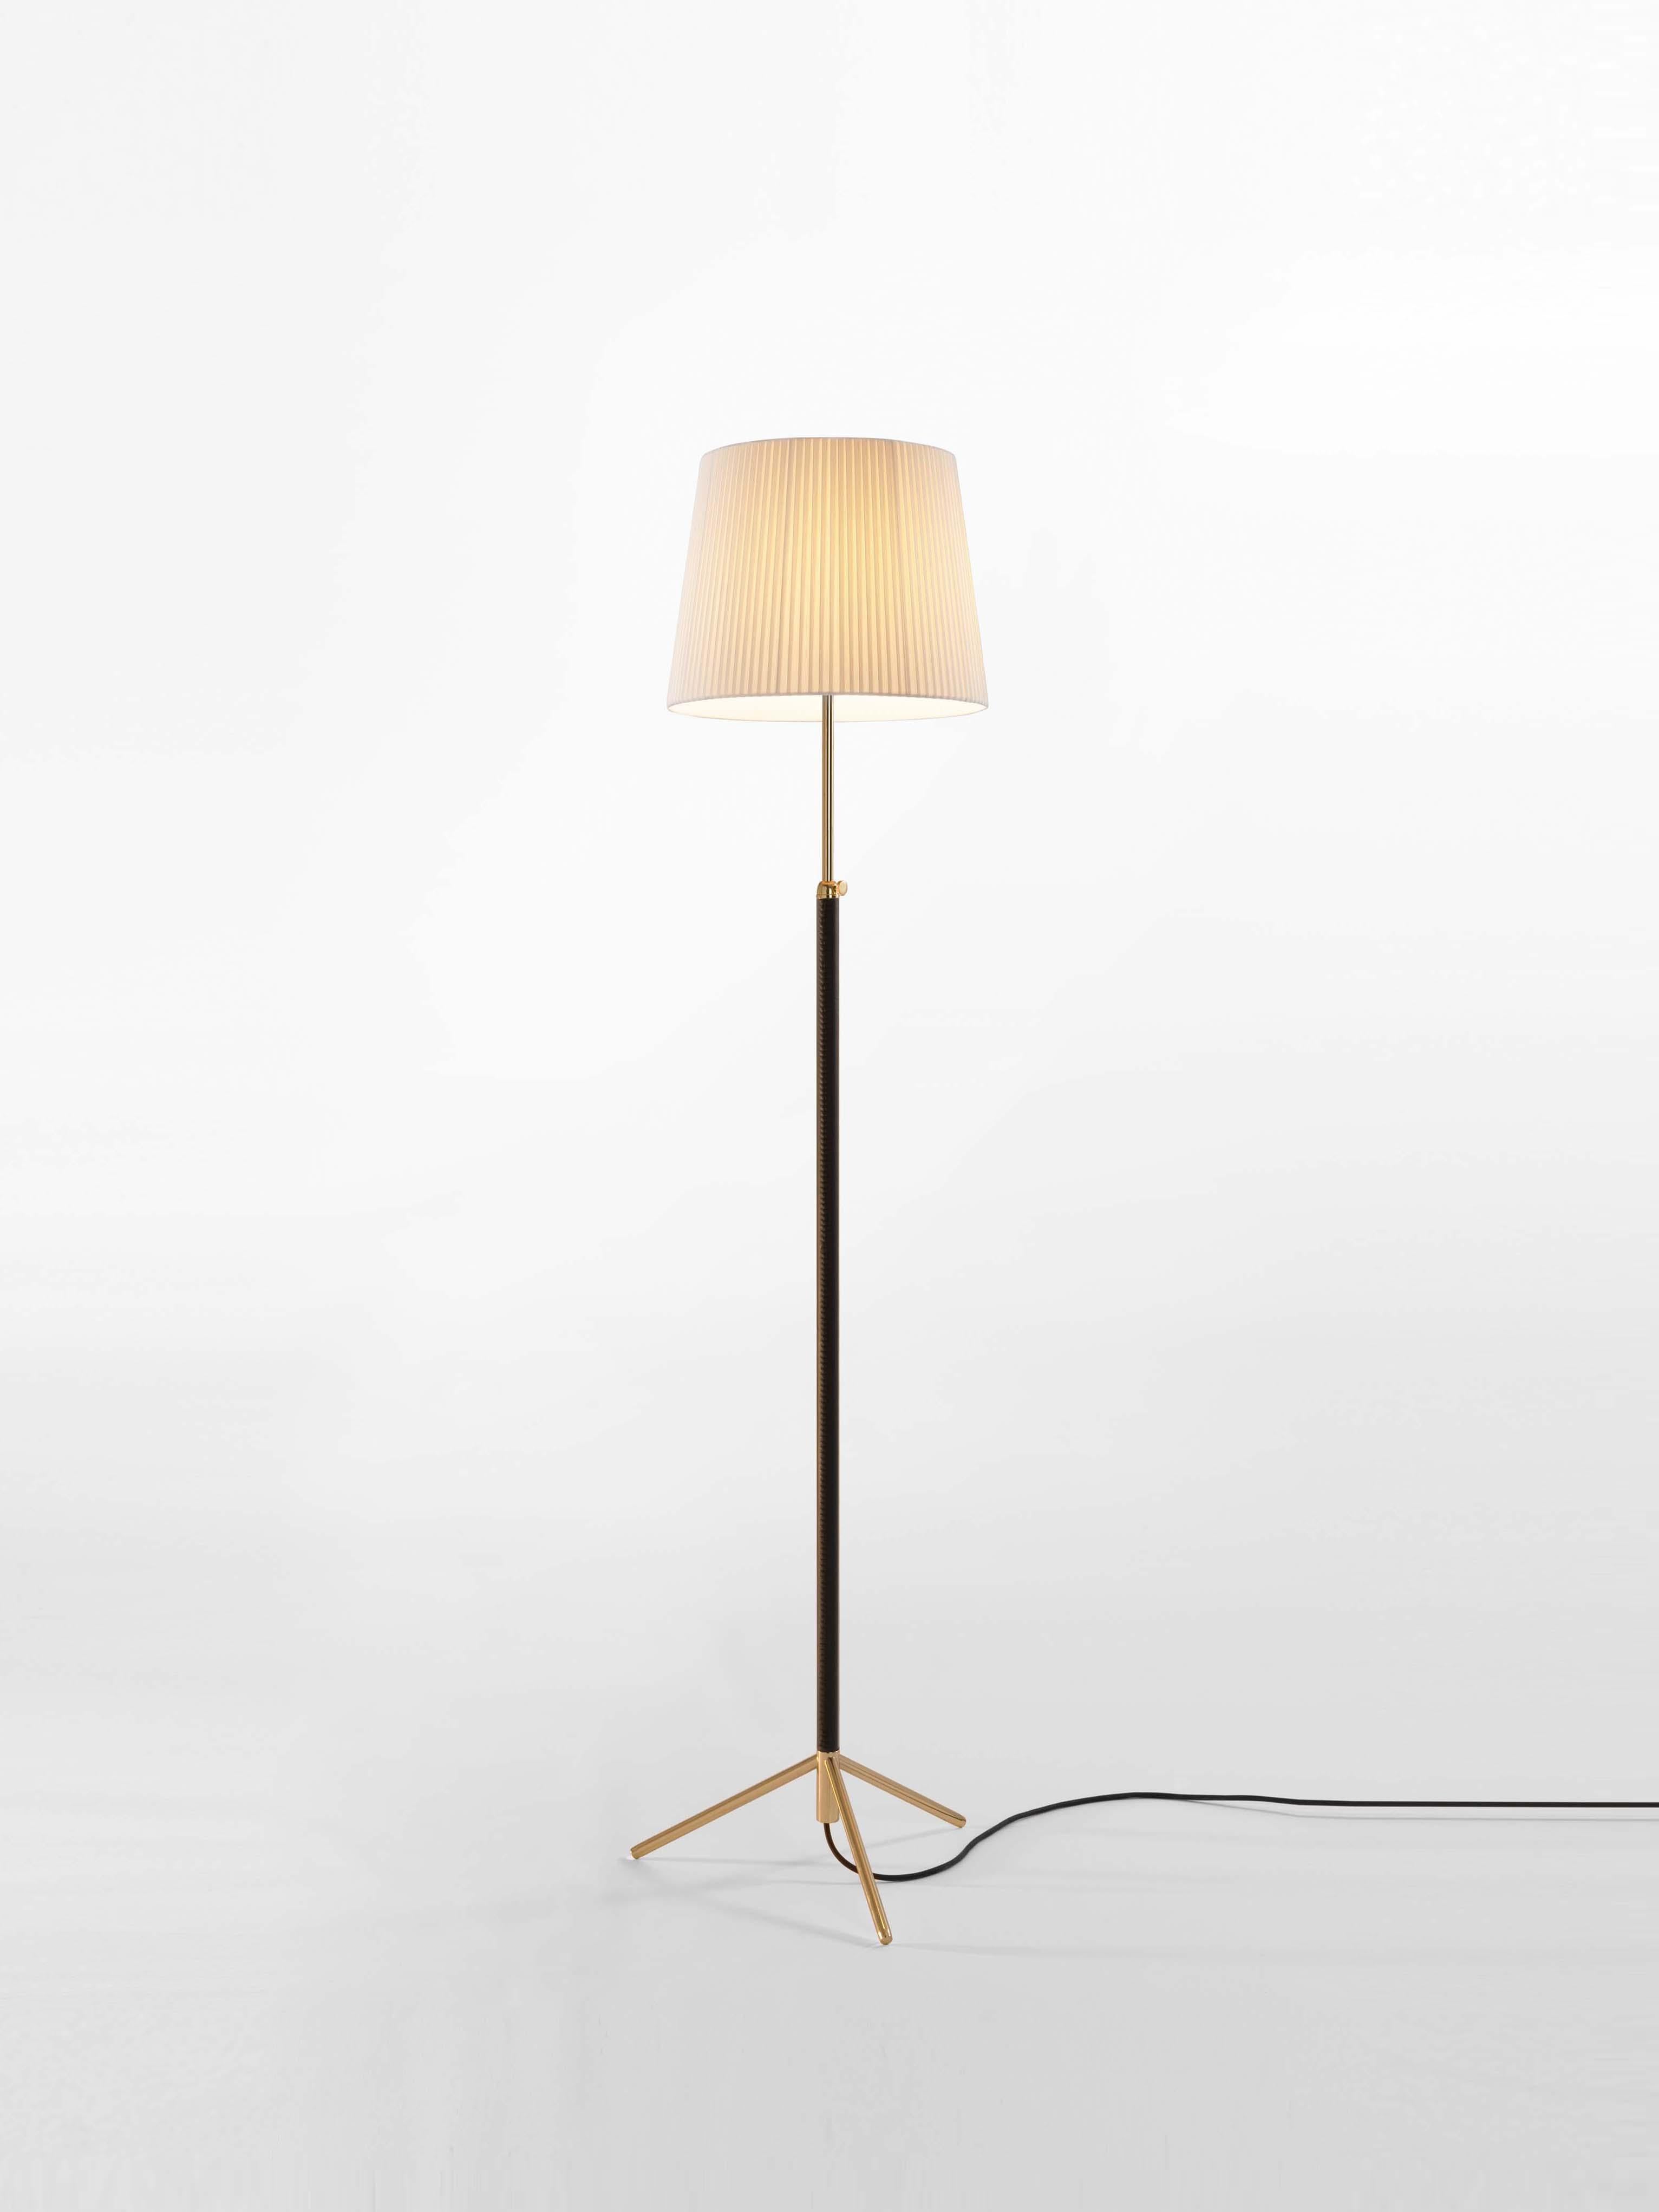 Natural and brass pie de salón G3 floor lamp by Jaume Sans
Dimensions: D 40 x H 120-160 cm
Materials: Metal, leather, ribbon.
Available in chrome-plated or polished brass structure.
Available in other shade colors and sizes.

This slender